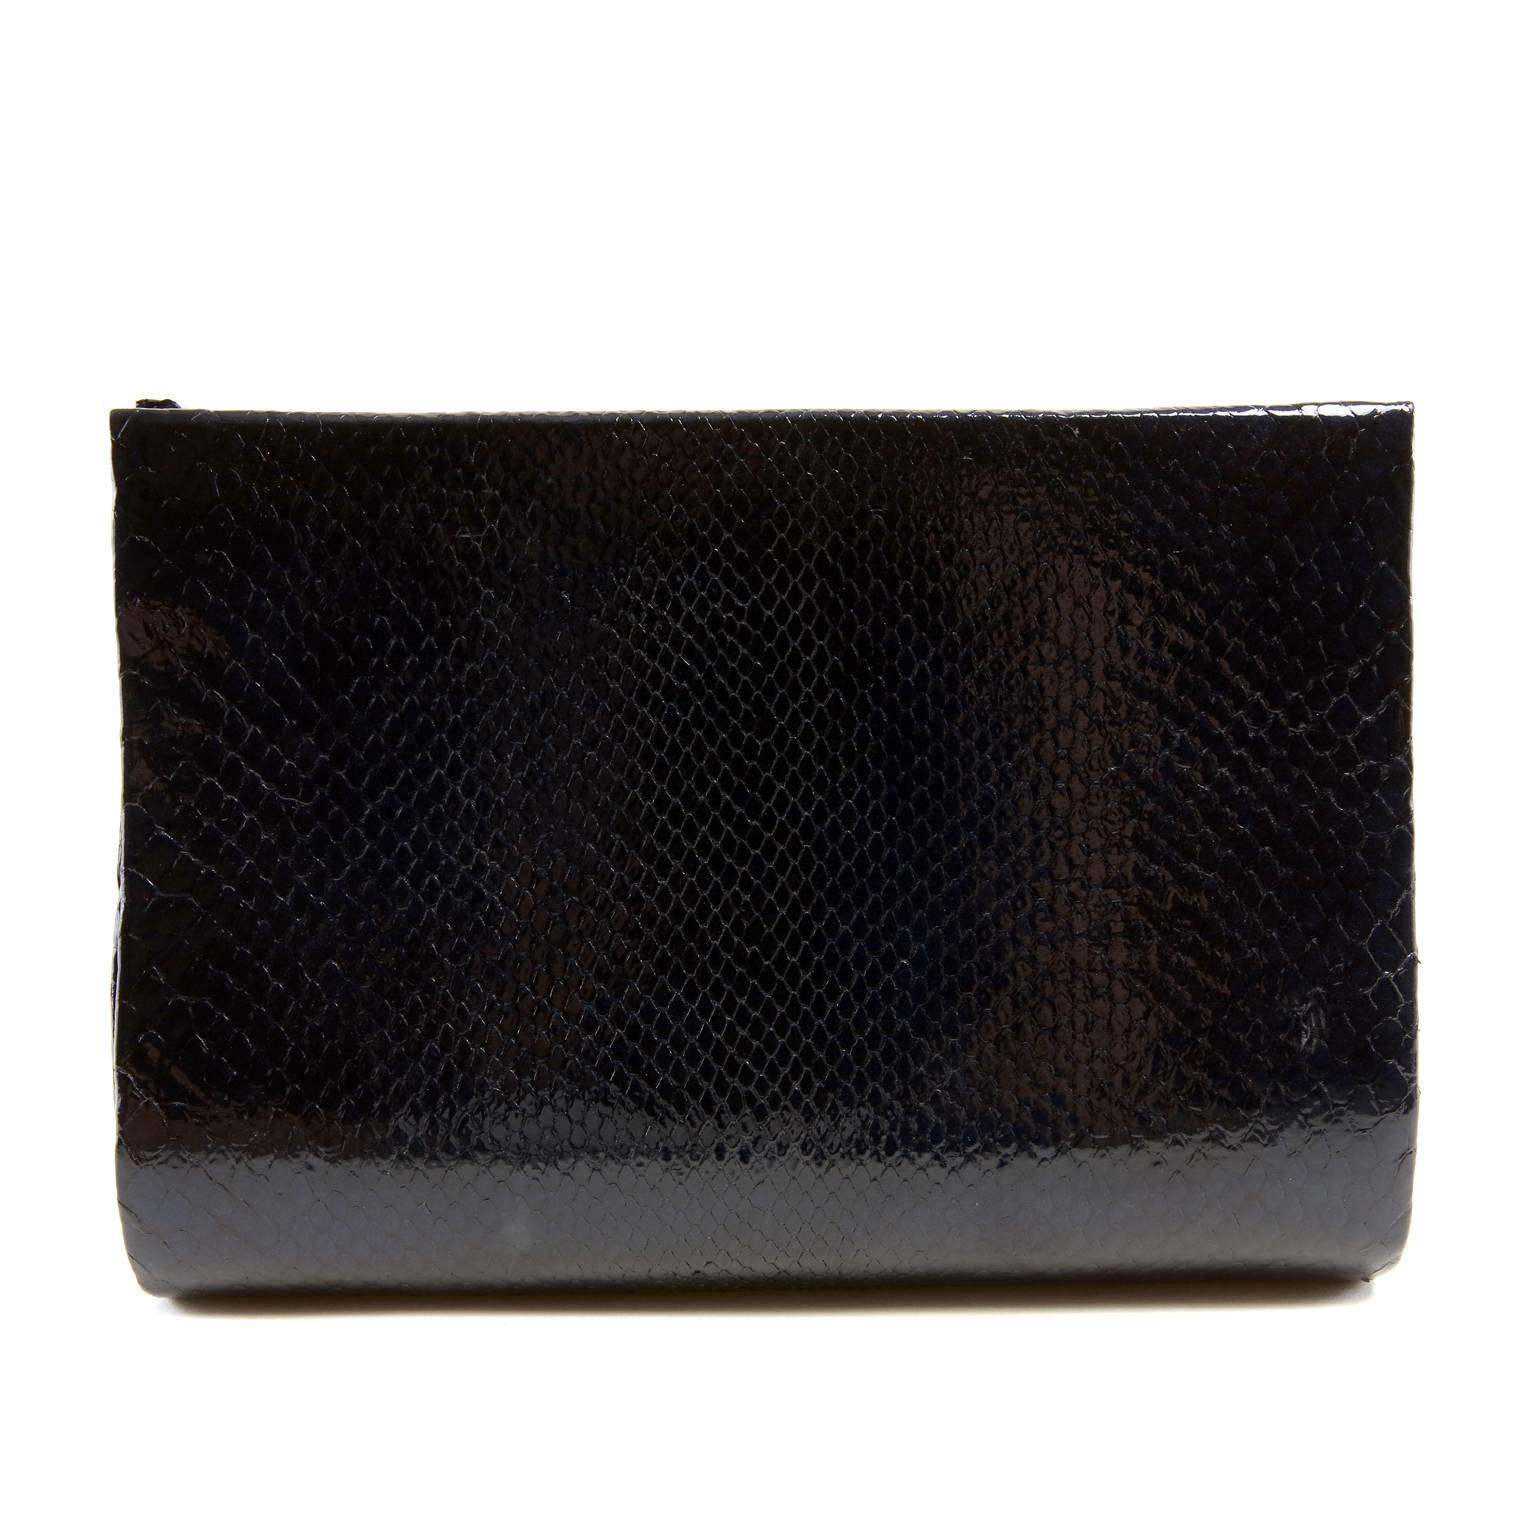 Paige Gamble Black Python Clutch- PRISTINE
  Totally unique and very rare, this eye-catching collectible combines brilliant color and textures.
 
Slim black glazed python clutch is adorned with multihued and iridescent agate slices.  Magnetic